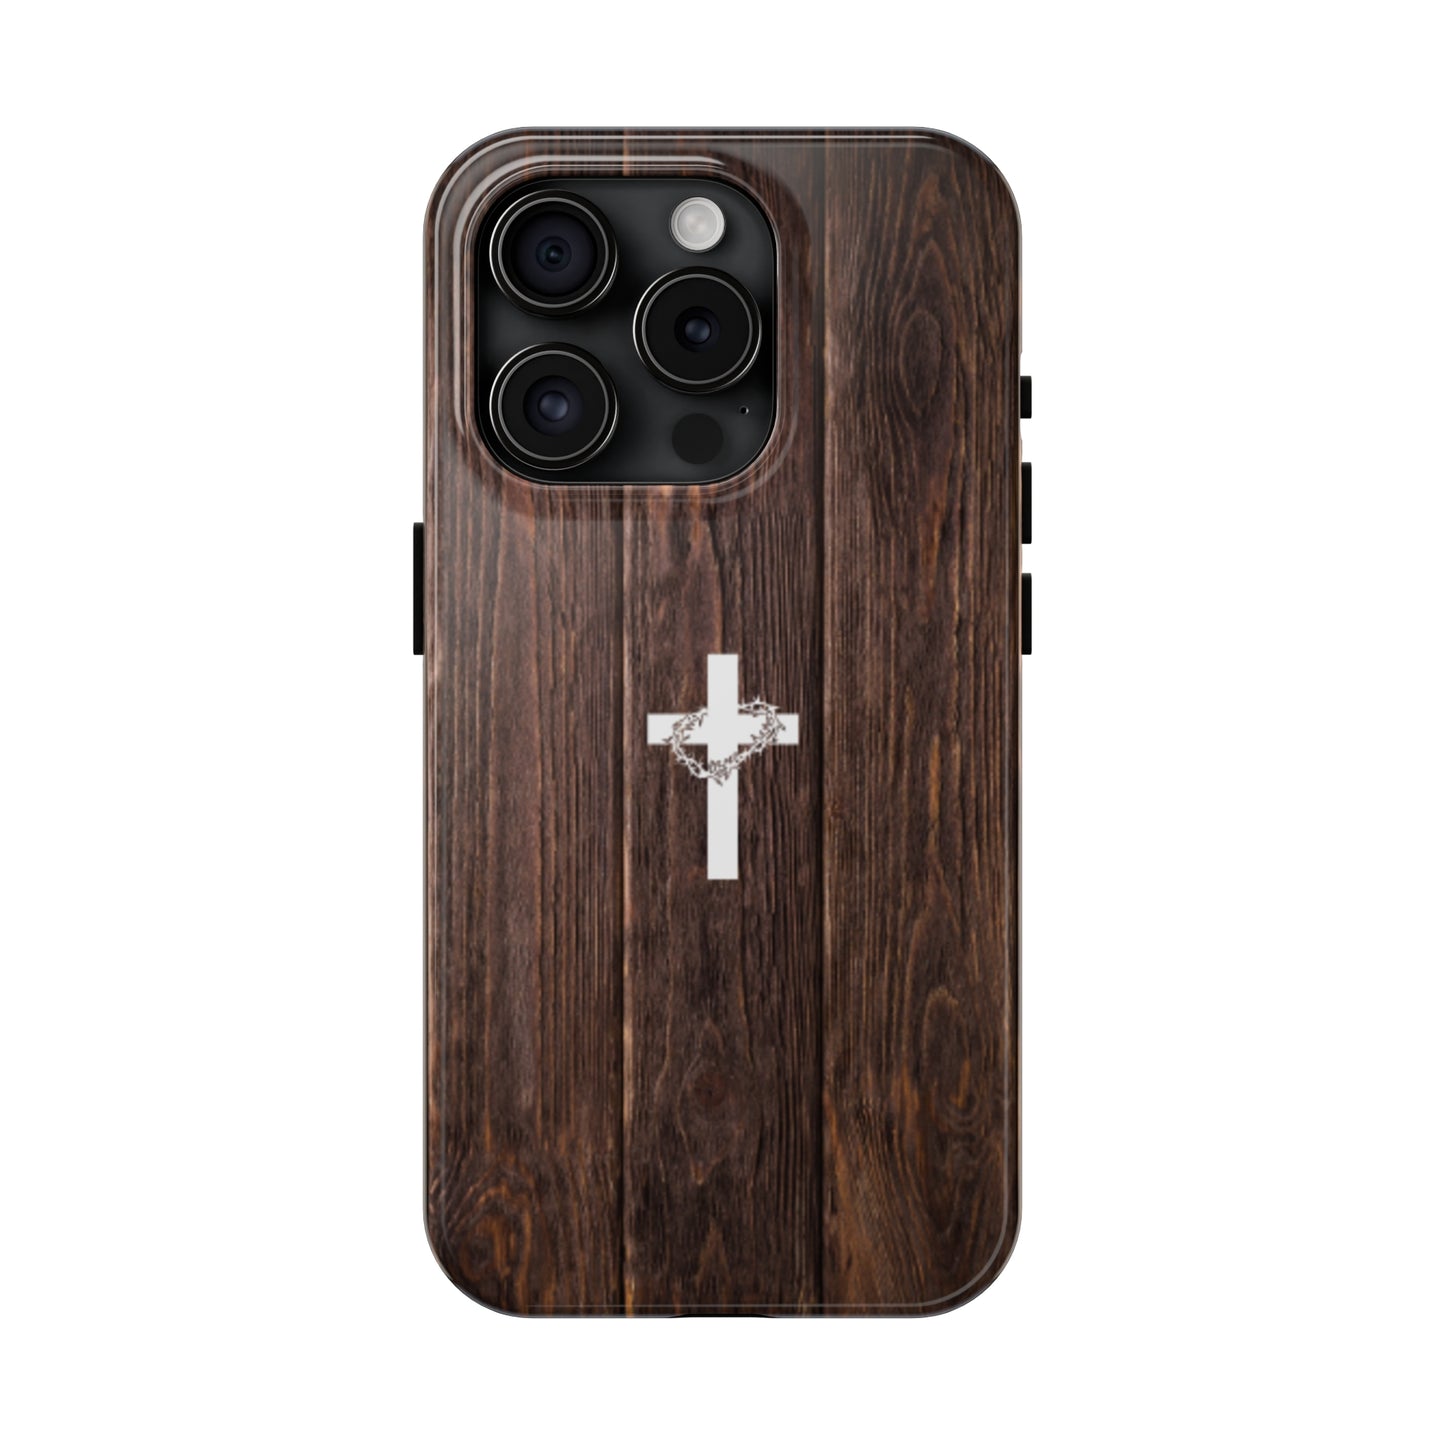 The Love of Jesus Wooden iPhone Case